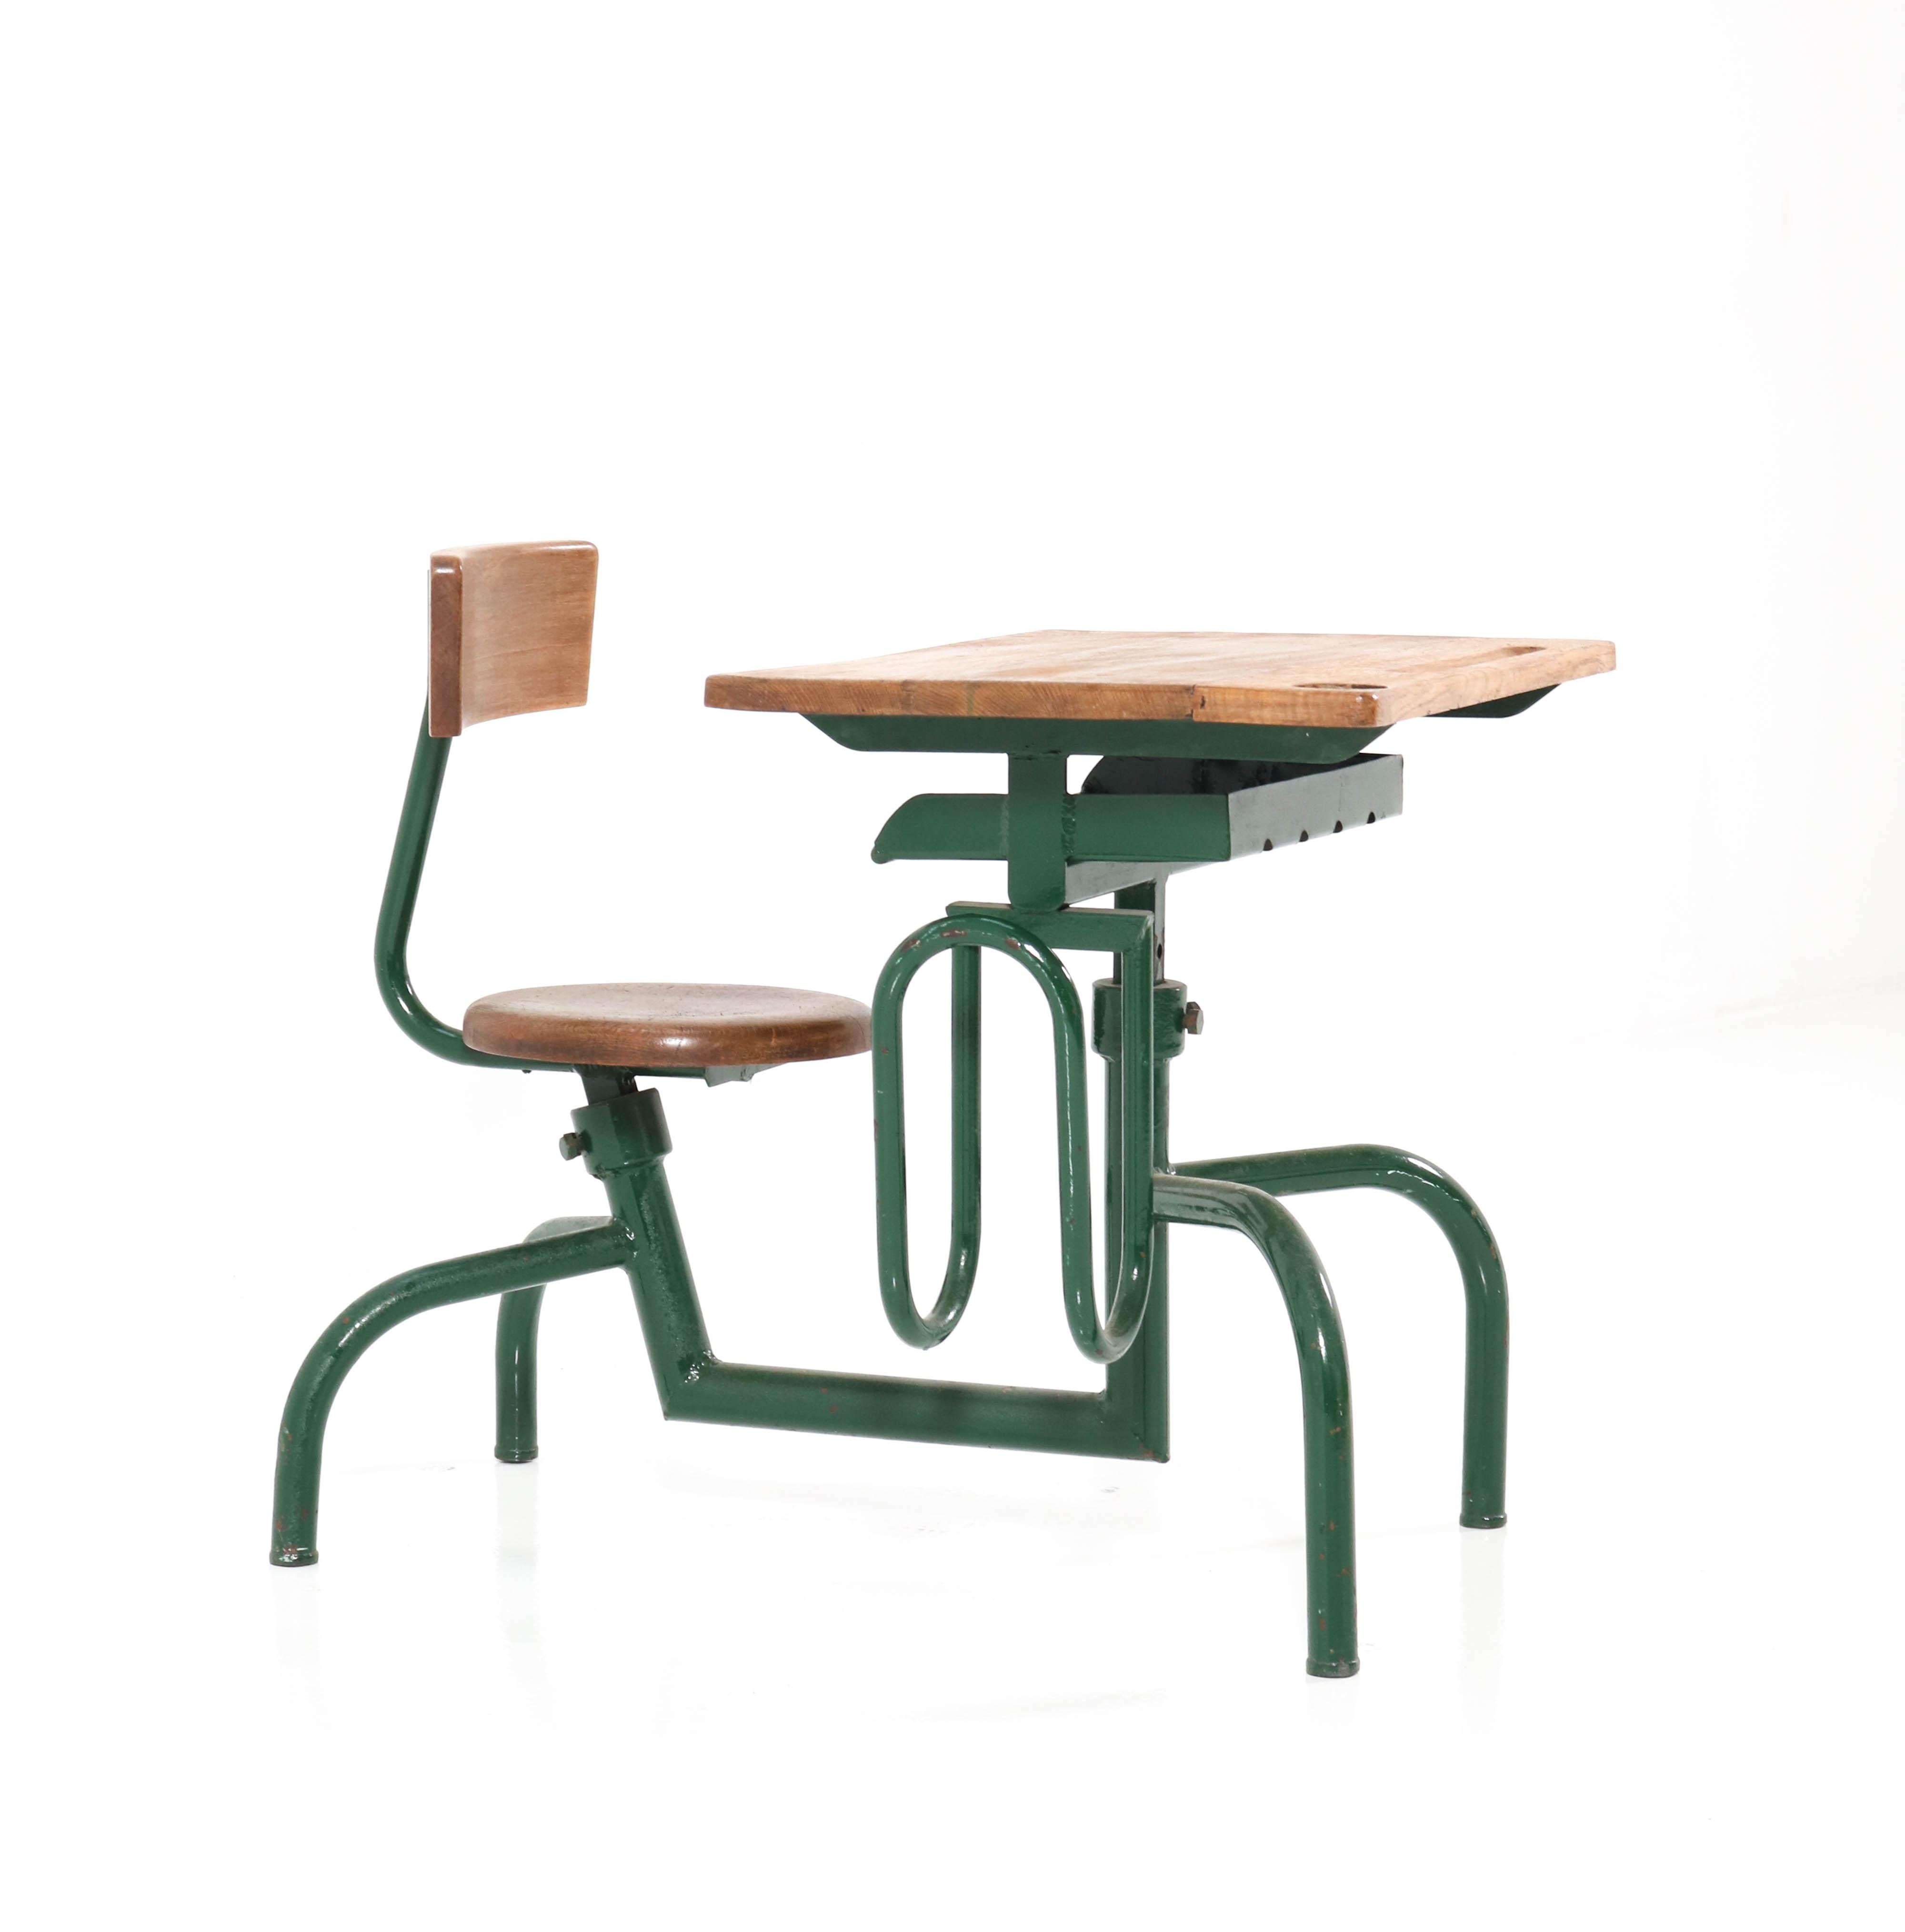 Wonderful Vintage Industrial school desk.
In the style of Jean Prouvé
Striking French design from the 1950s /60s.
Green lacquered metal base with original solid oak top and seat.
In very good condition with a beautiful patina.

 